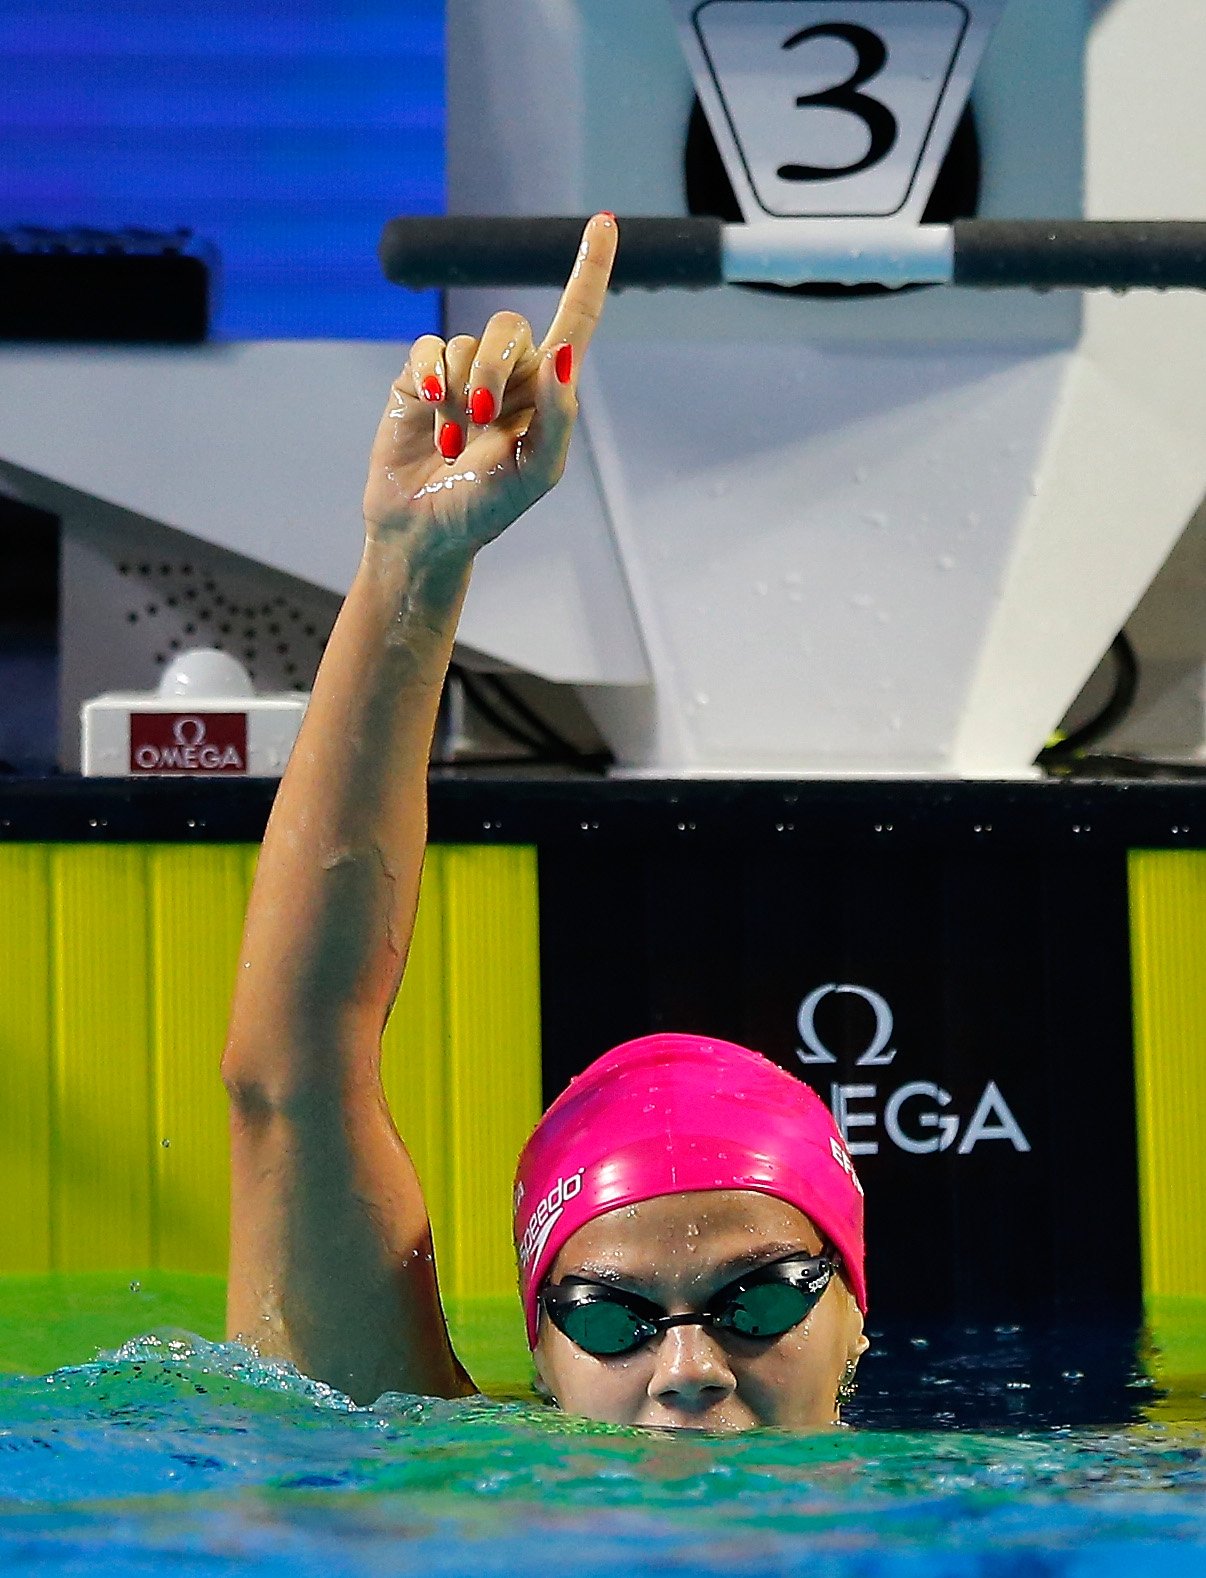 INDIANAPOLIS, IN - DECEMBER 12: Yuliya Efimova of Russia reacts after winning the Women's 100m Breaststroke during day two of the Mutual of Omaha Duel in the Pool at Indiana University Natatorium on December 12, 2015 in Indianapolis, Indiana. (Photo by Kevin C. Cox/Getty Images)